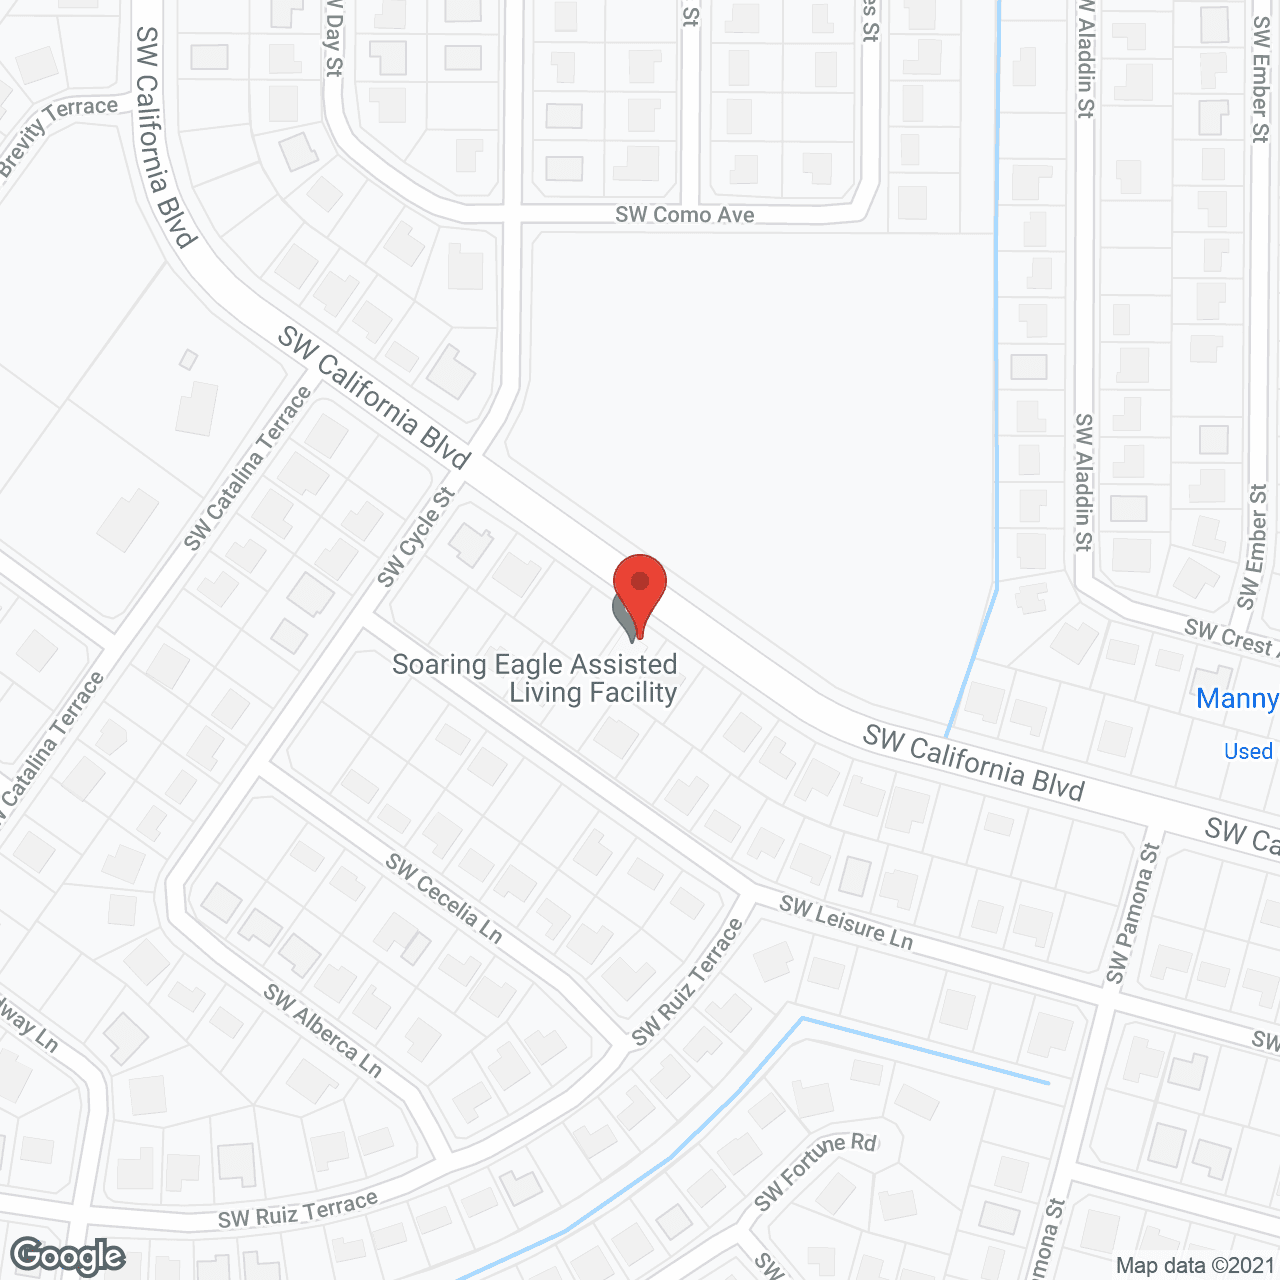 Soaring Eagle Assisted Living Facility in google map